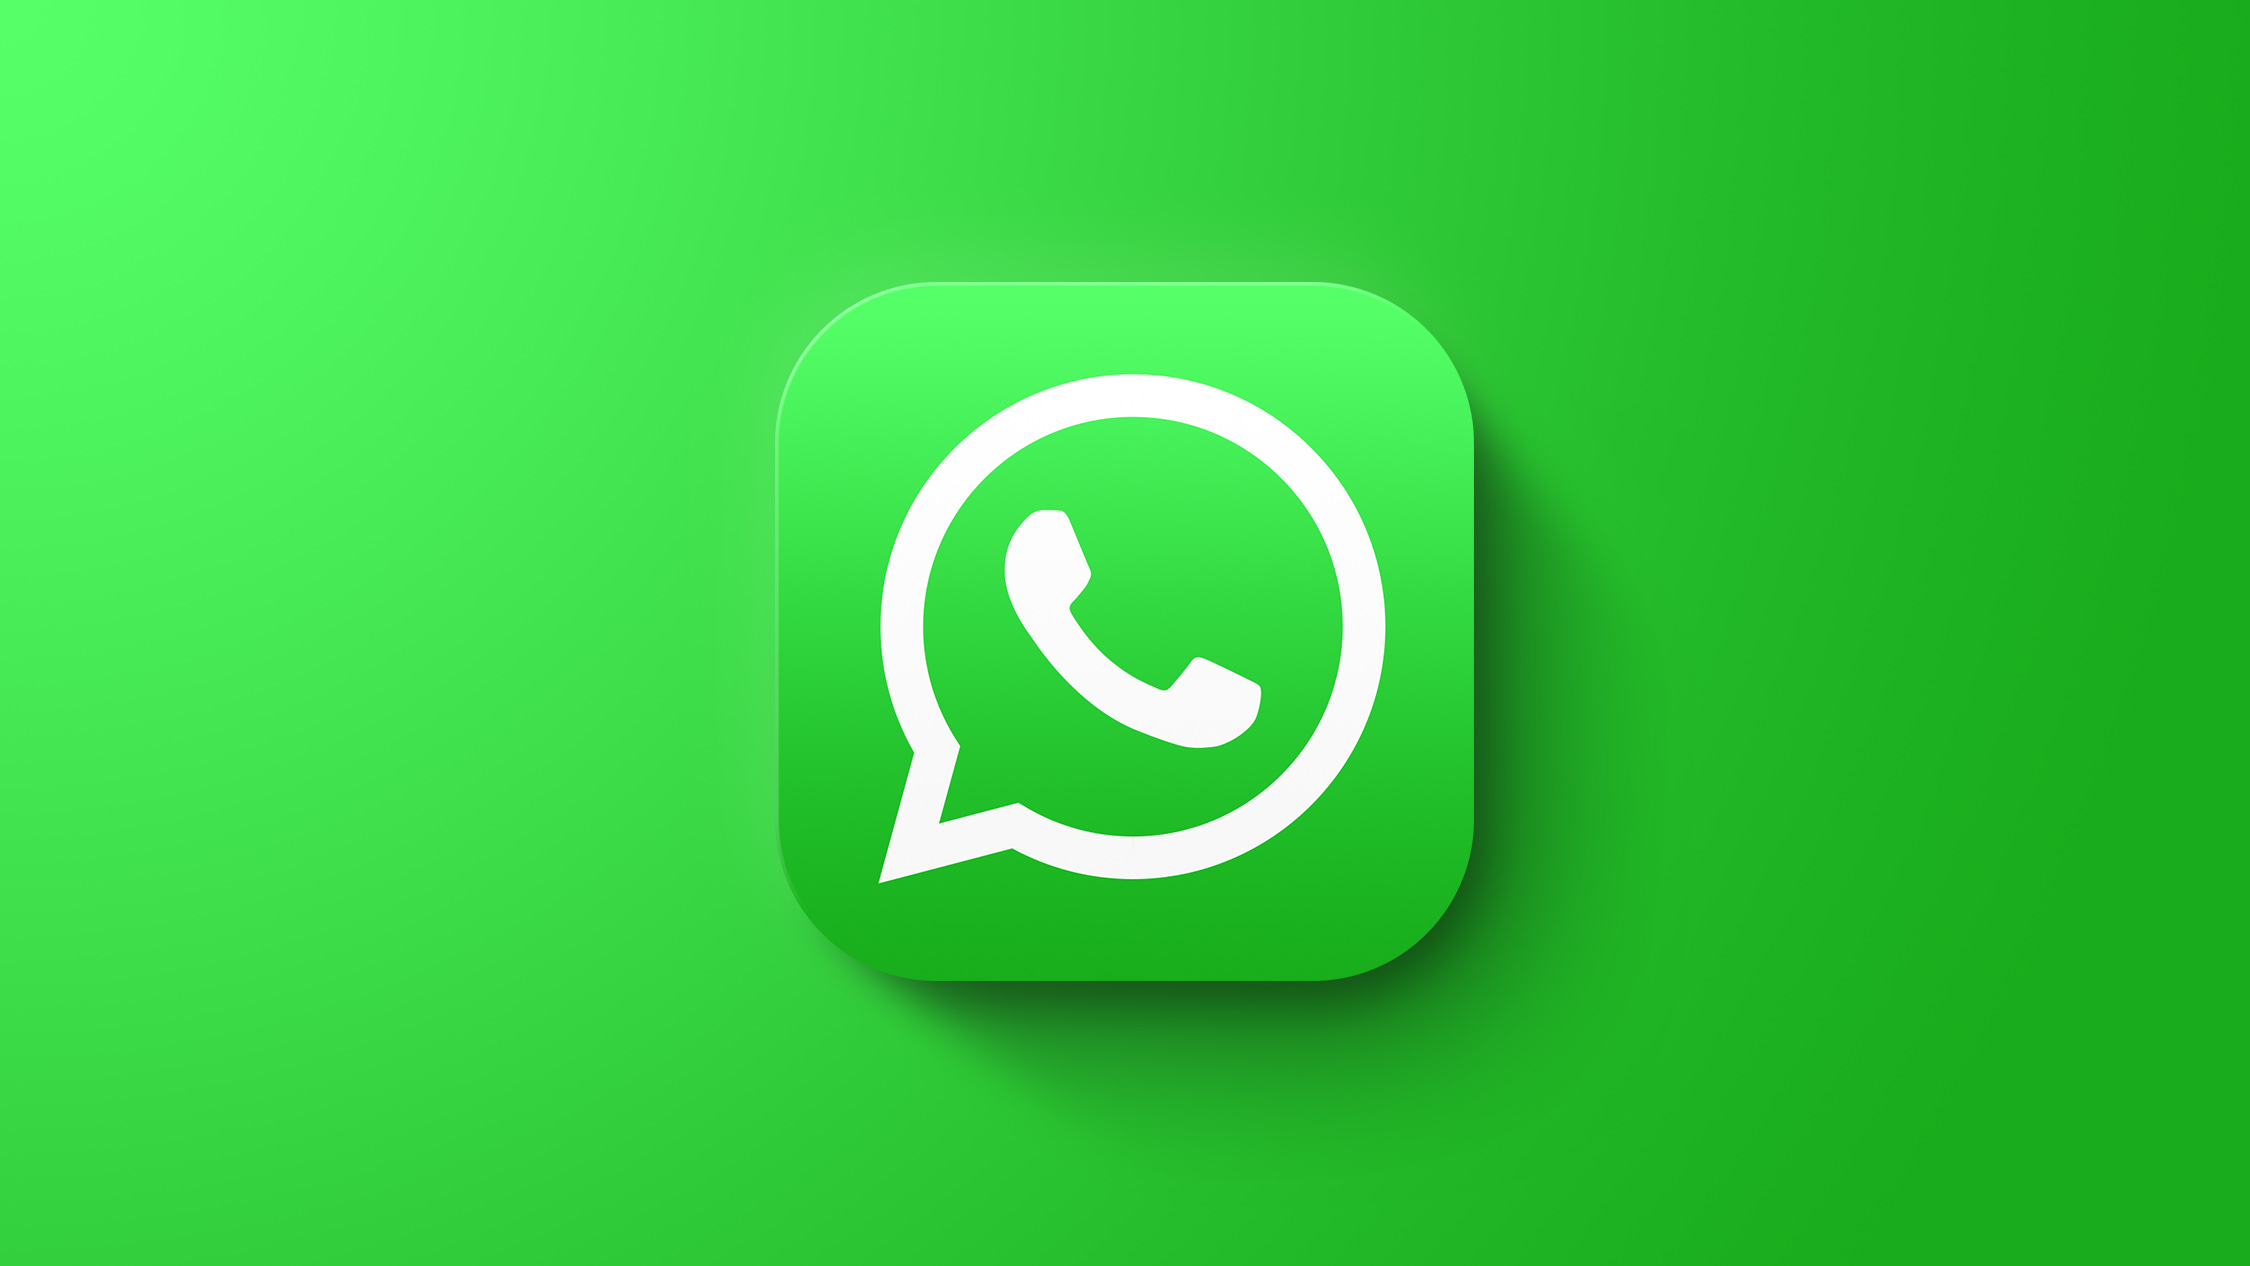 WhatsApp to Let Users Leave Group Chats ‘Silently’ and View Rich Link Previews in Status Updates